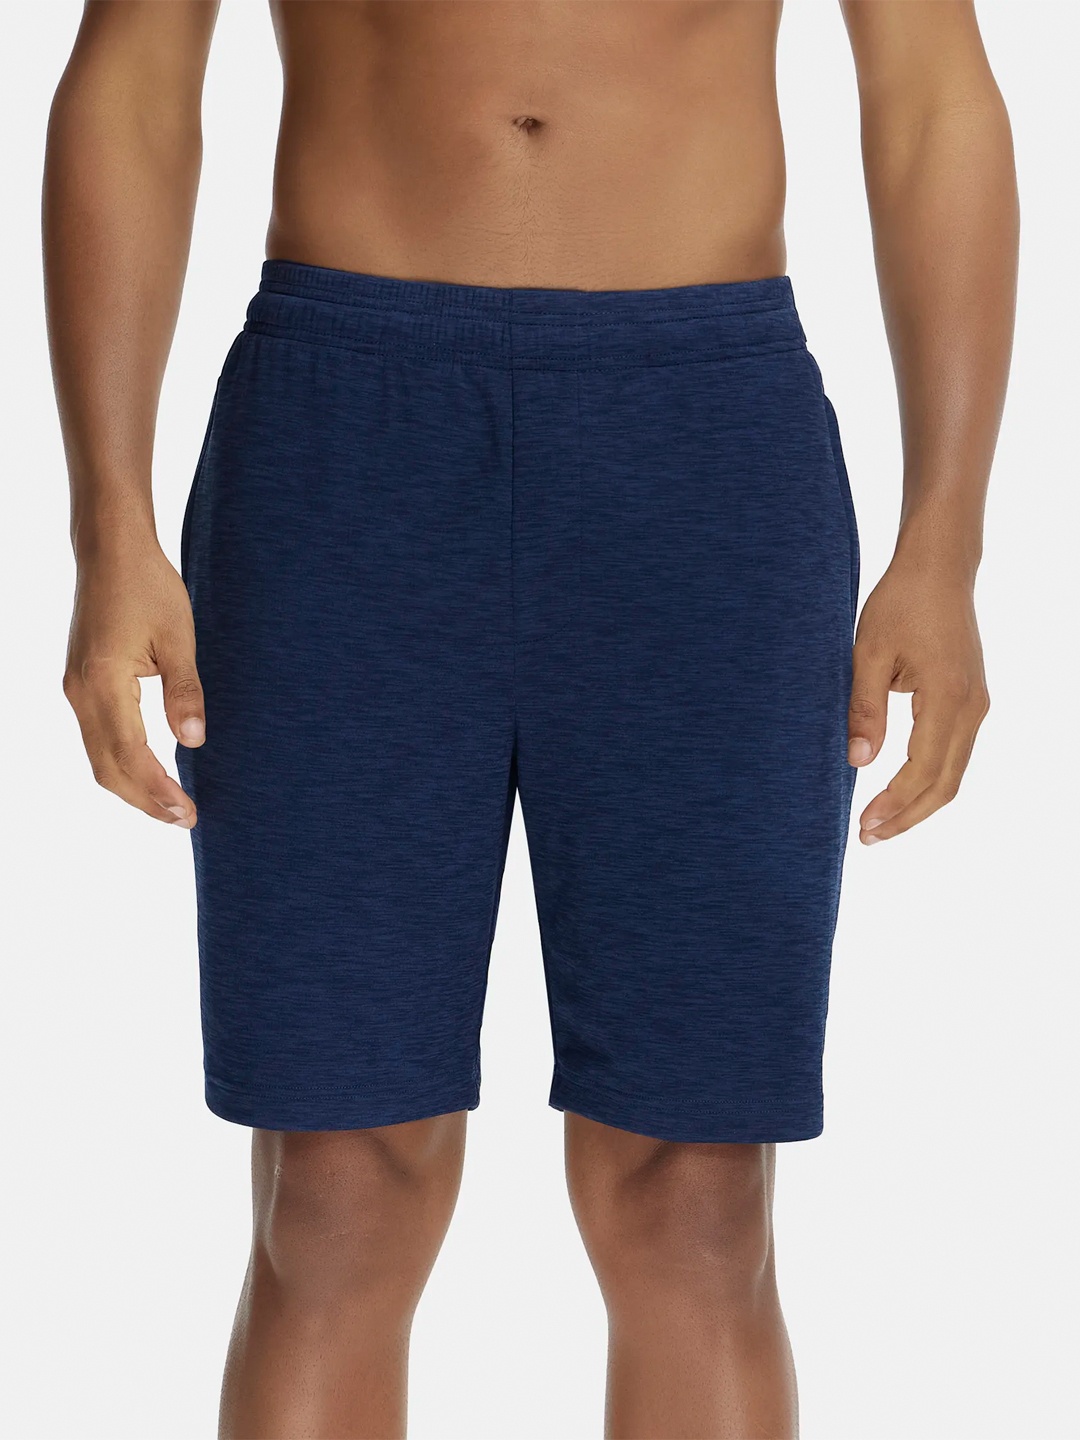 

Jockey Men Navy Blue Running Sports Shorts with Antimicrobial Technology